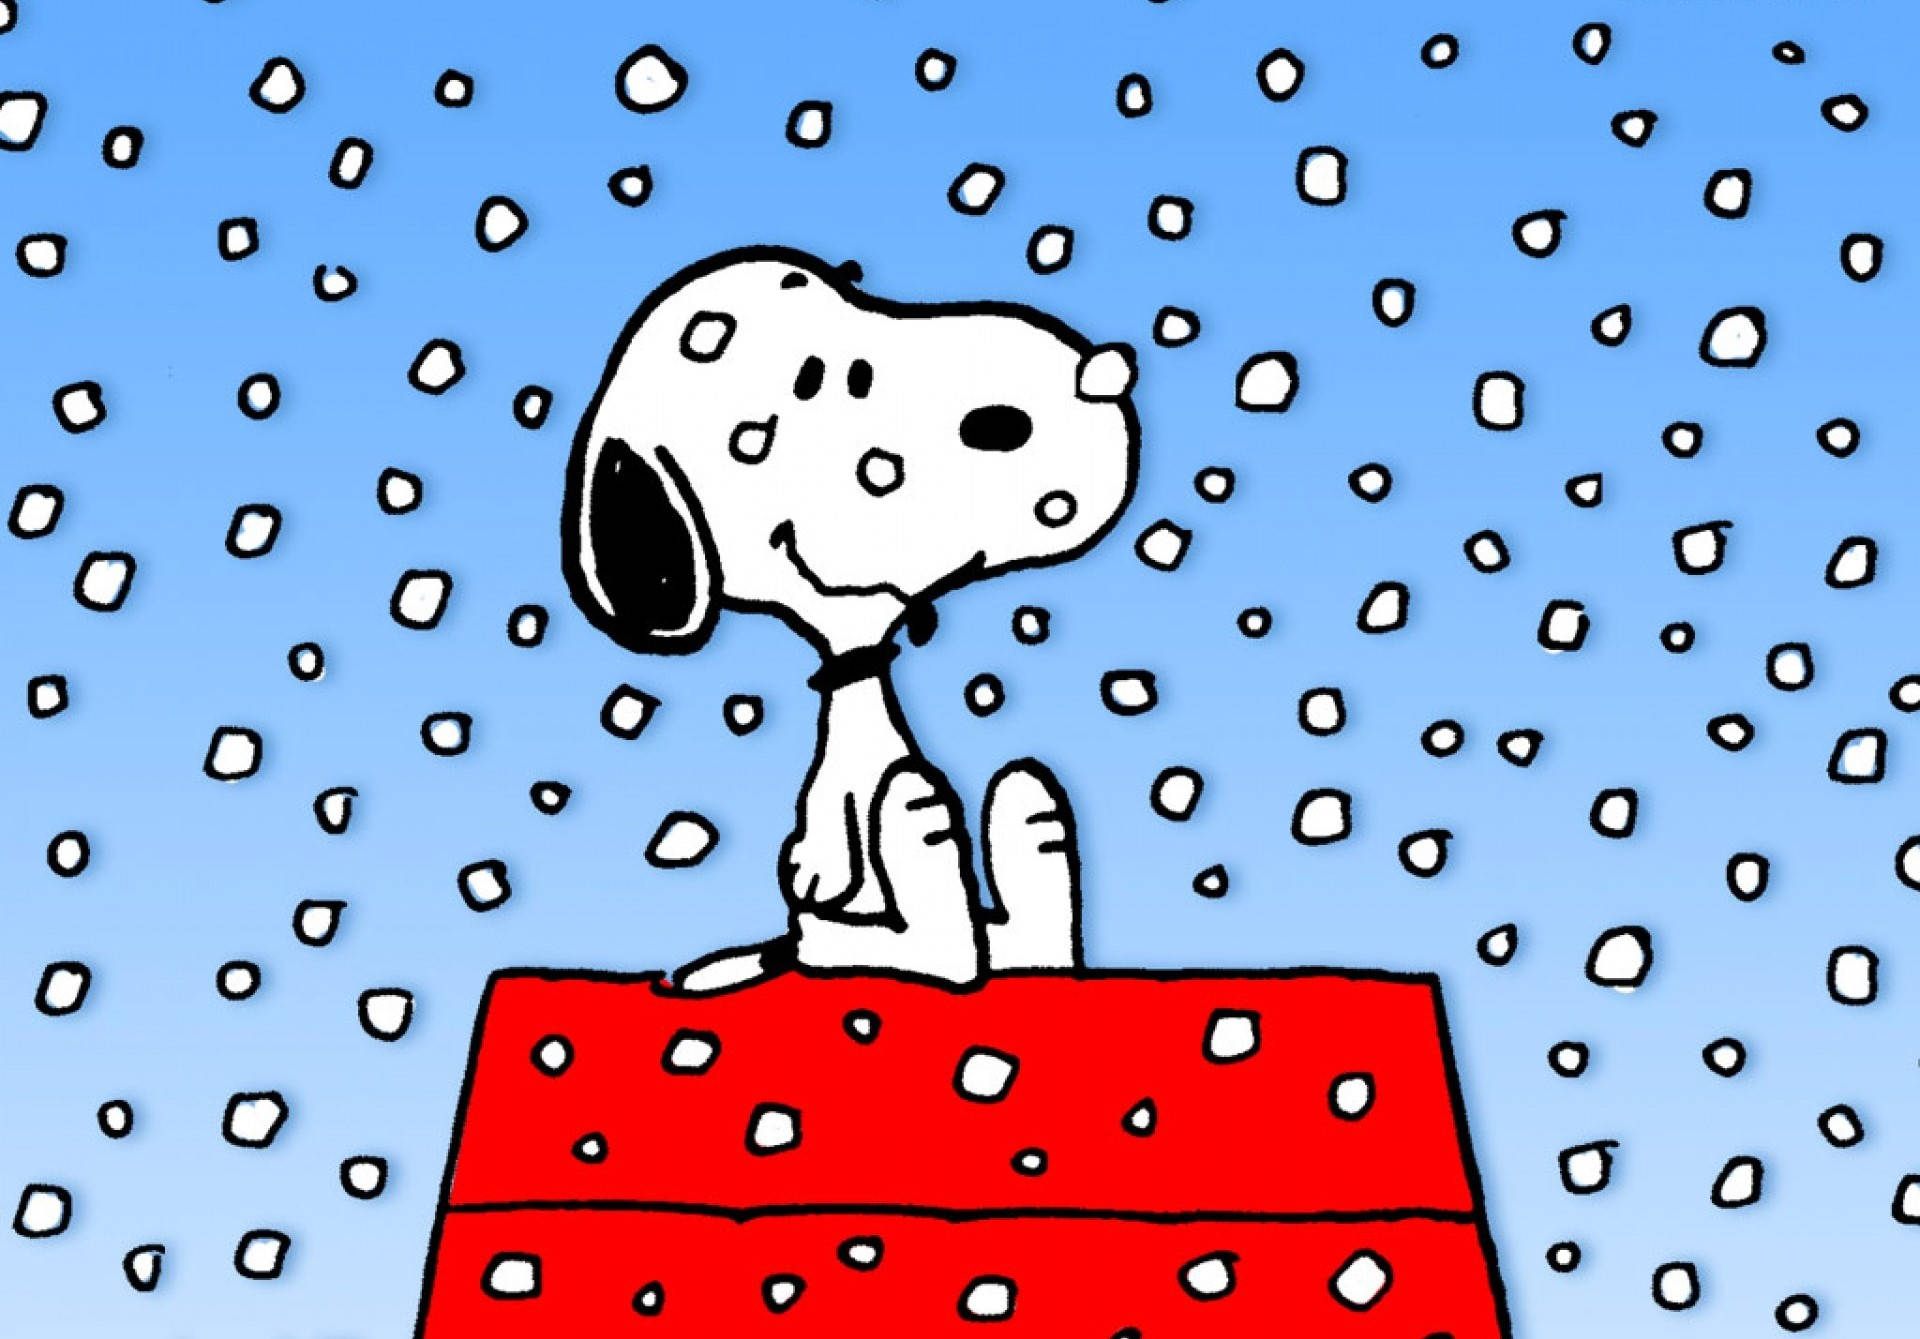 Enjoy the Holiday Season with a Snoopy Christmas iPhone Wallpaper